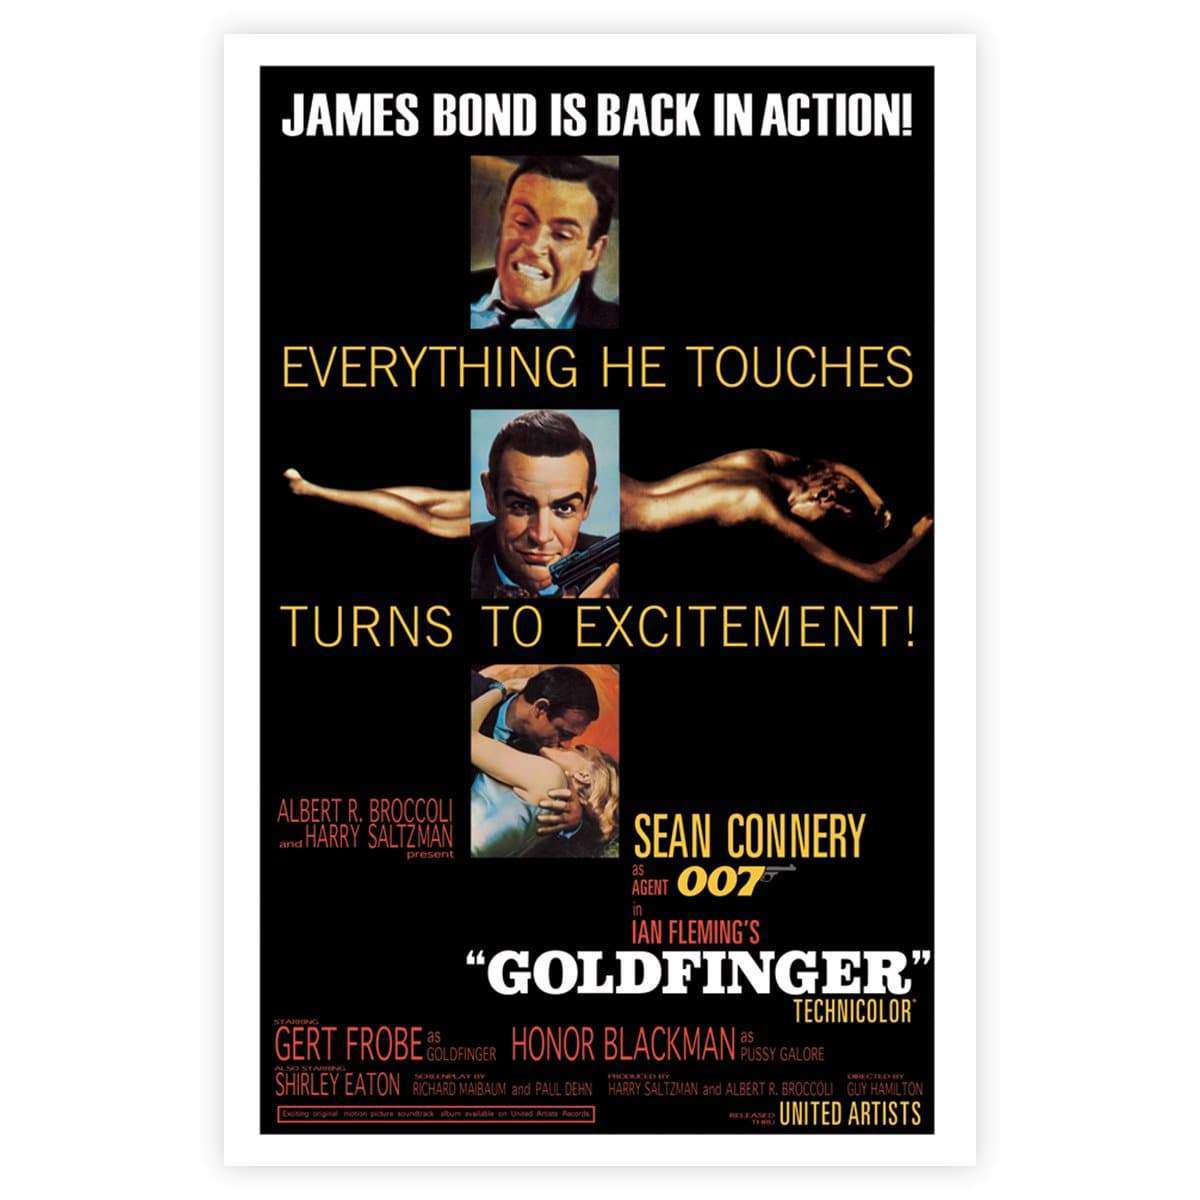 James Bond Goldfinger Poster - Excitement Edition POSTER pyramid 